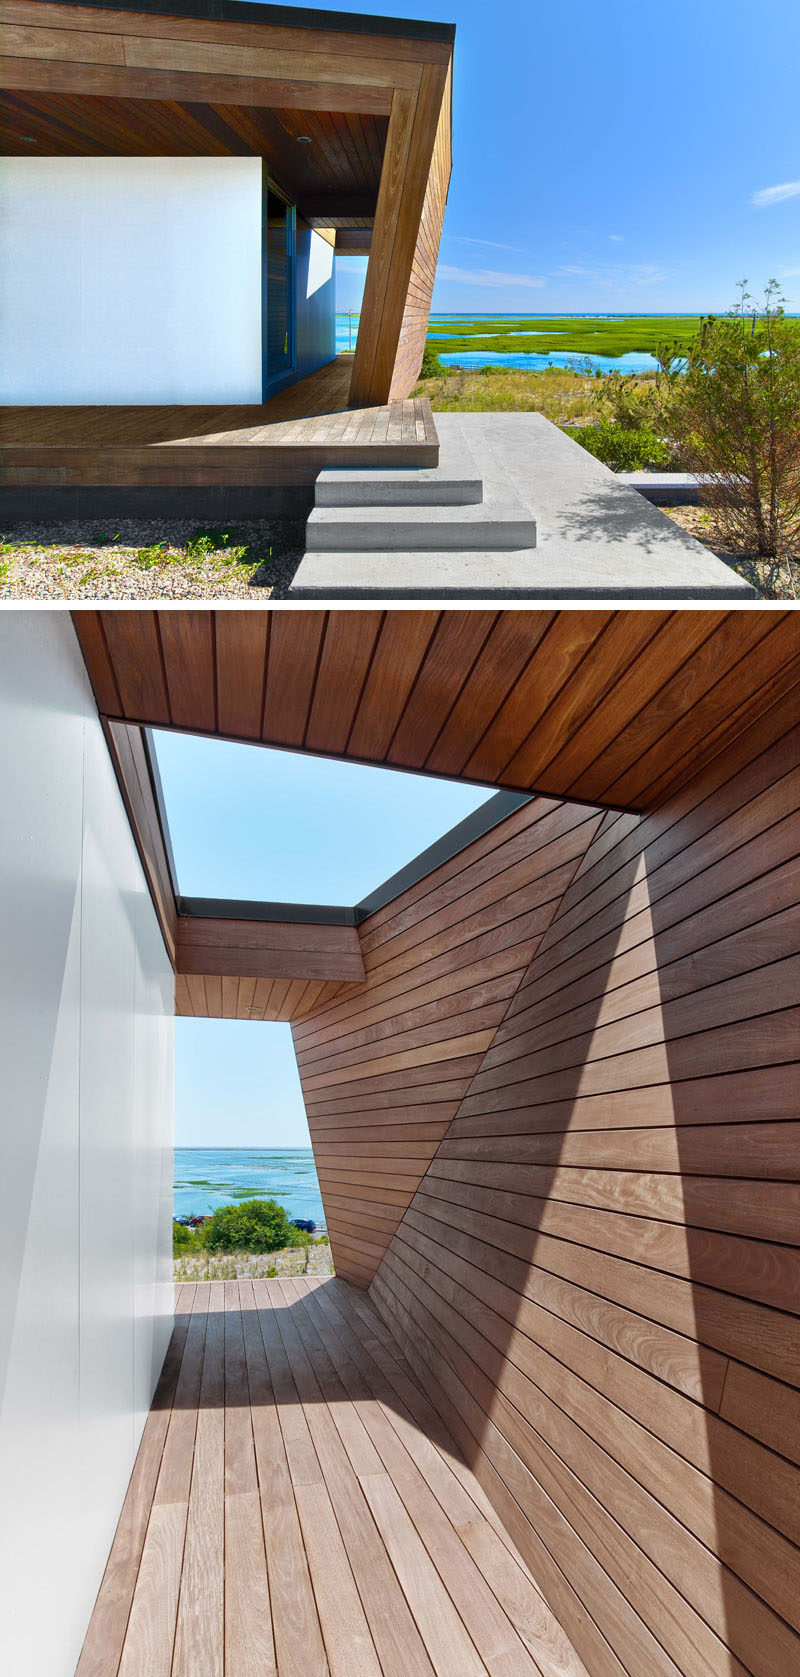 Welcoming you to this modern home is a one storey sculptural entrance wrapped in wood that takes inspiration from the faceted shape of rocks that are washed ashore on the beach.